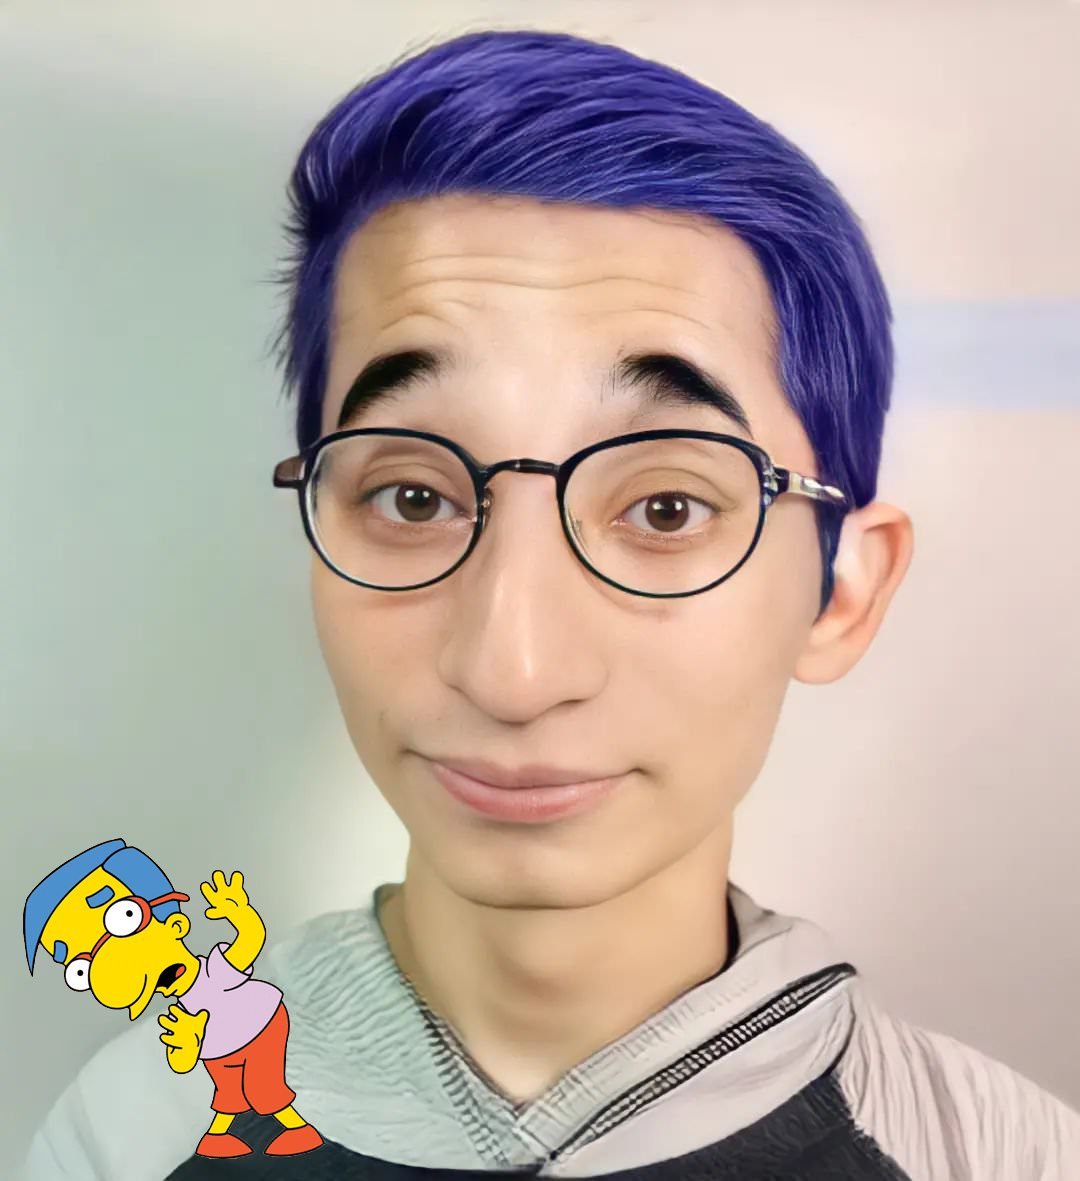 rendered by AI - Milhouse from The Simpsons